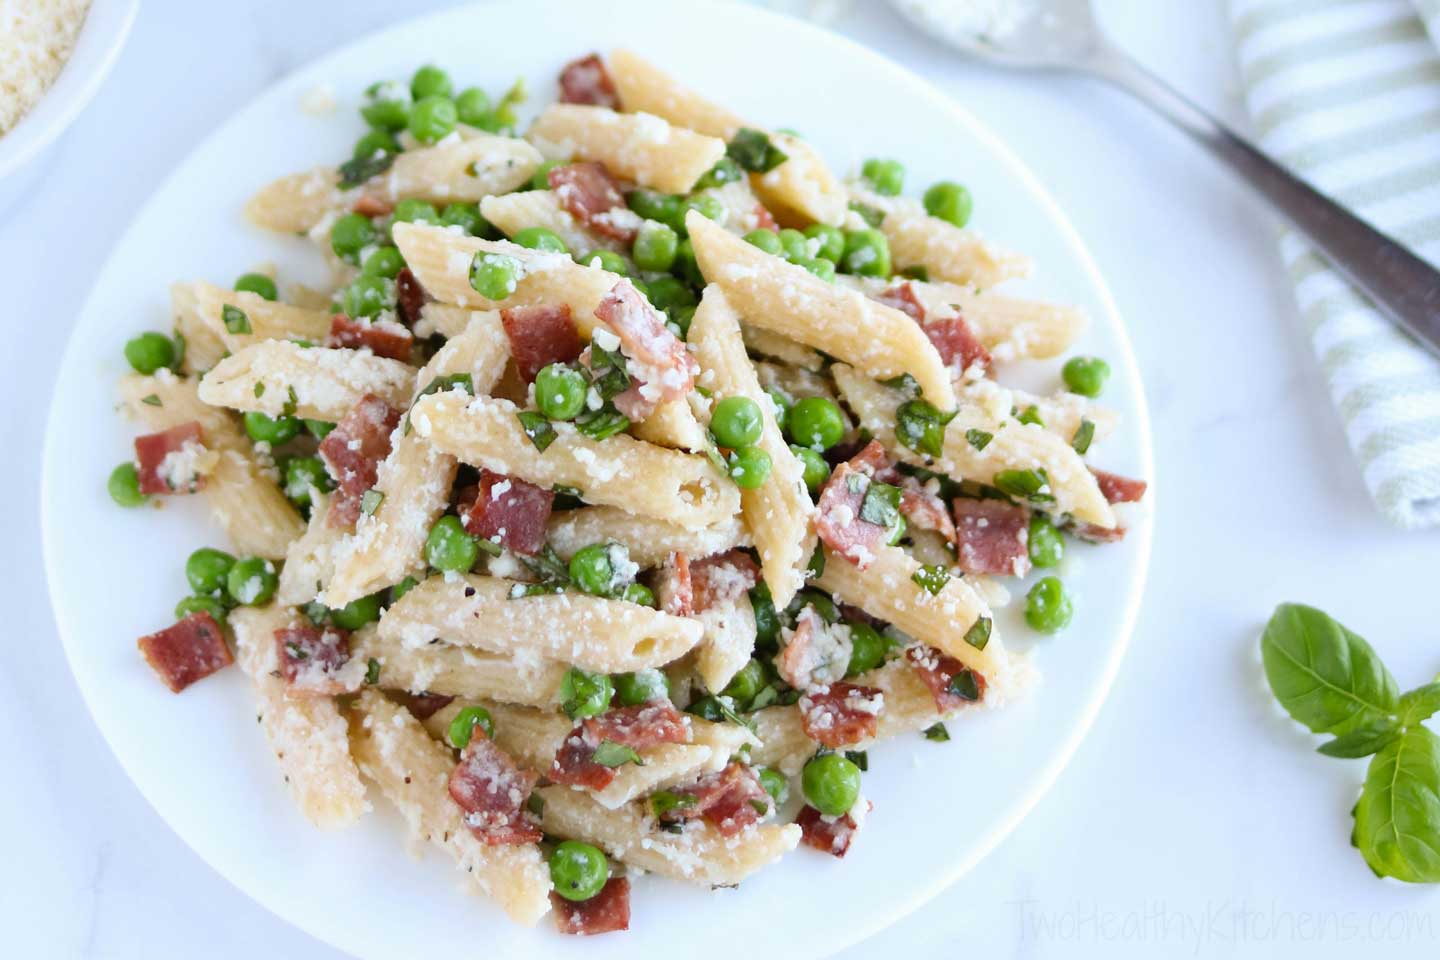 Bacon pasta recipes are classically popular choices, but our lightened-up recipe is one you can truly feel great about serving!